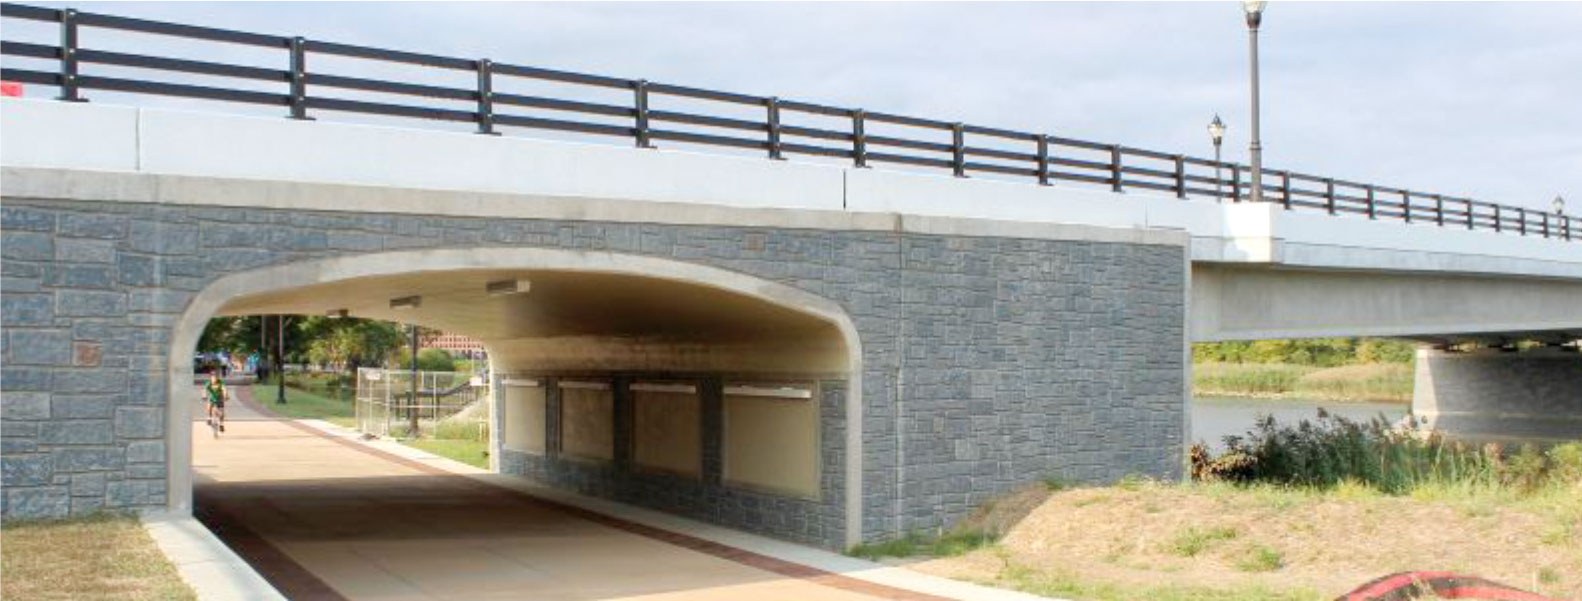 View of the completed underpass for the shared-use path.